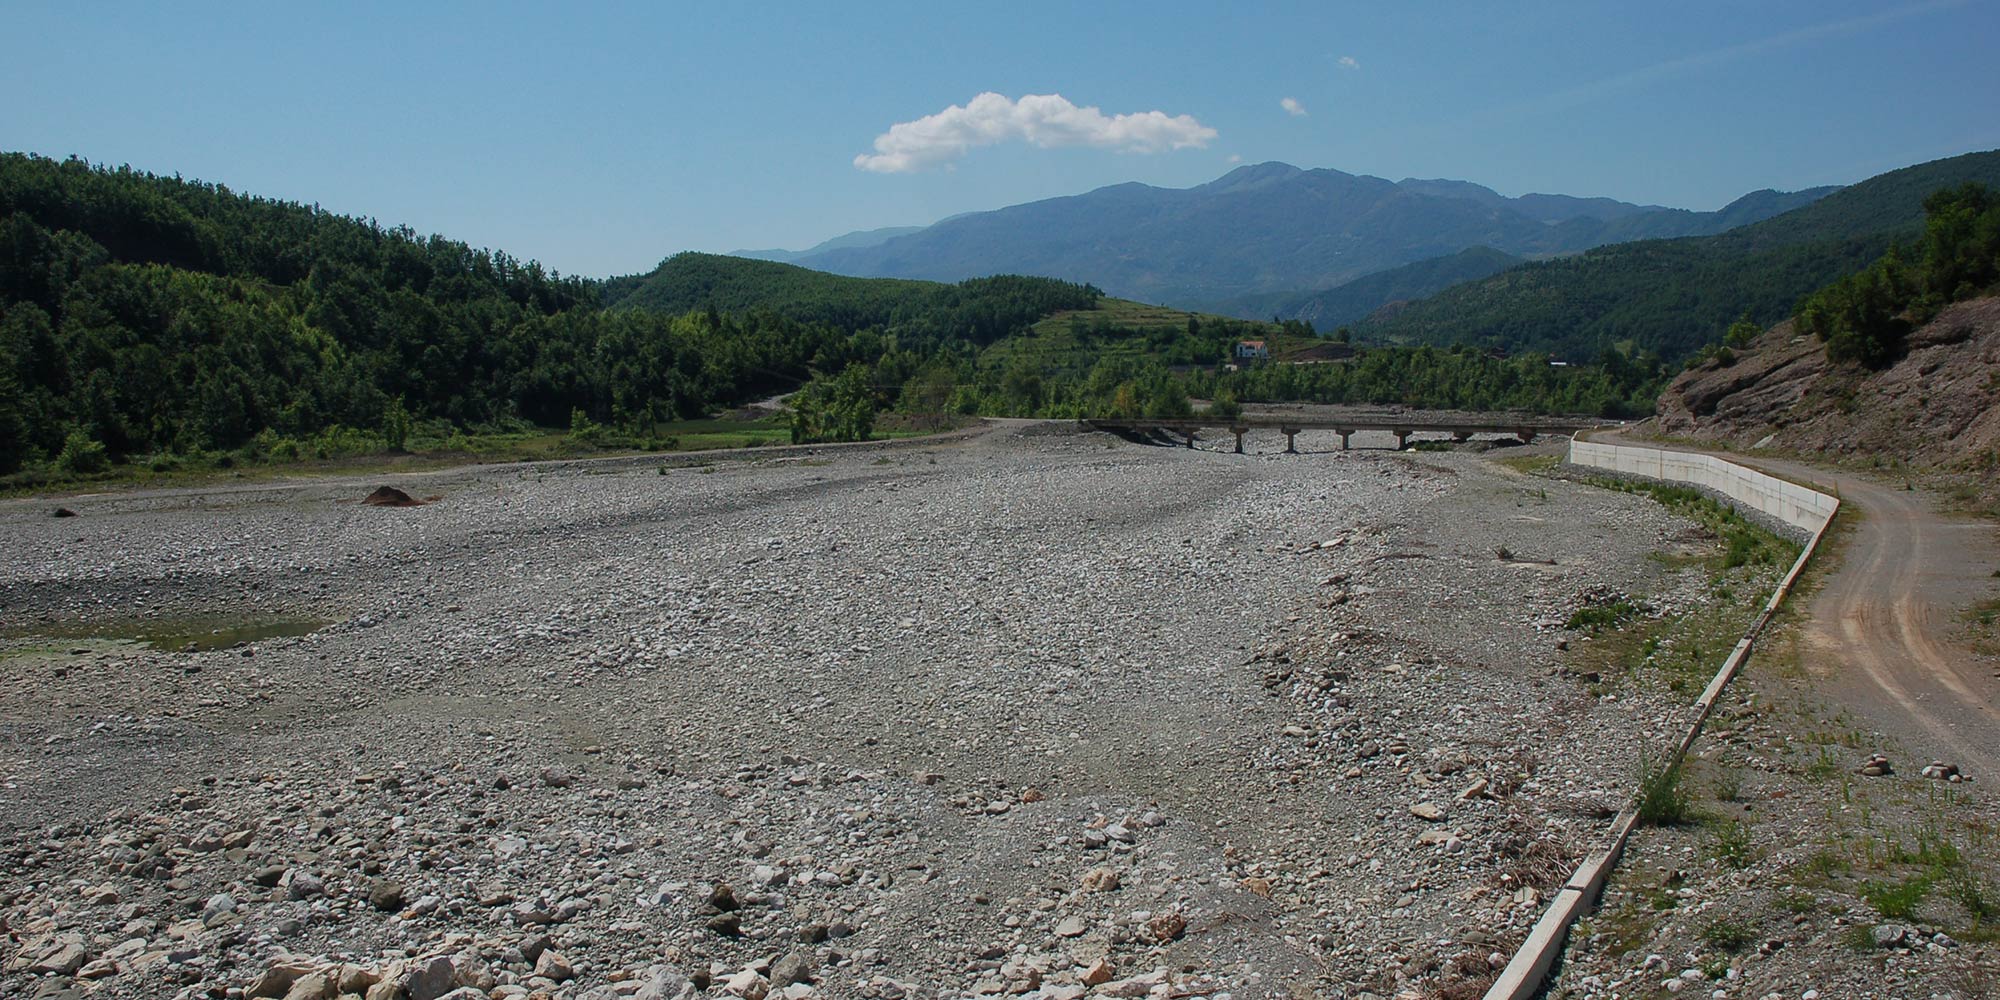 A large dried out river bed.